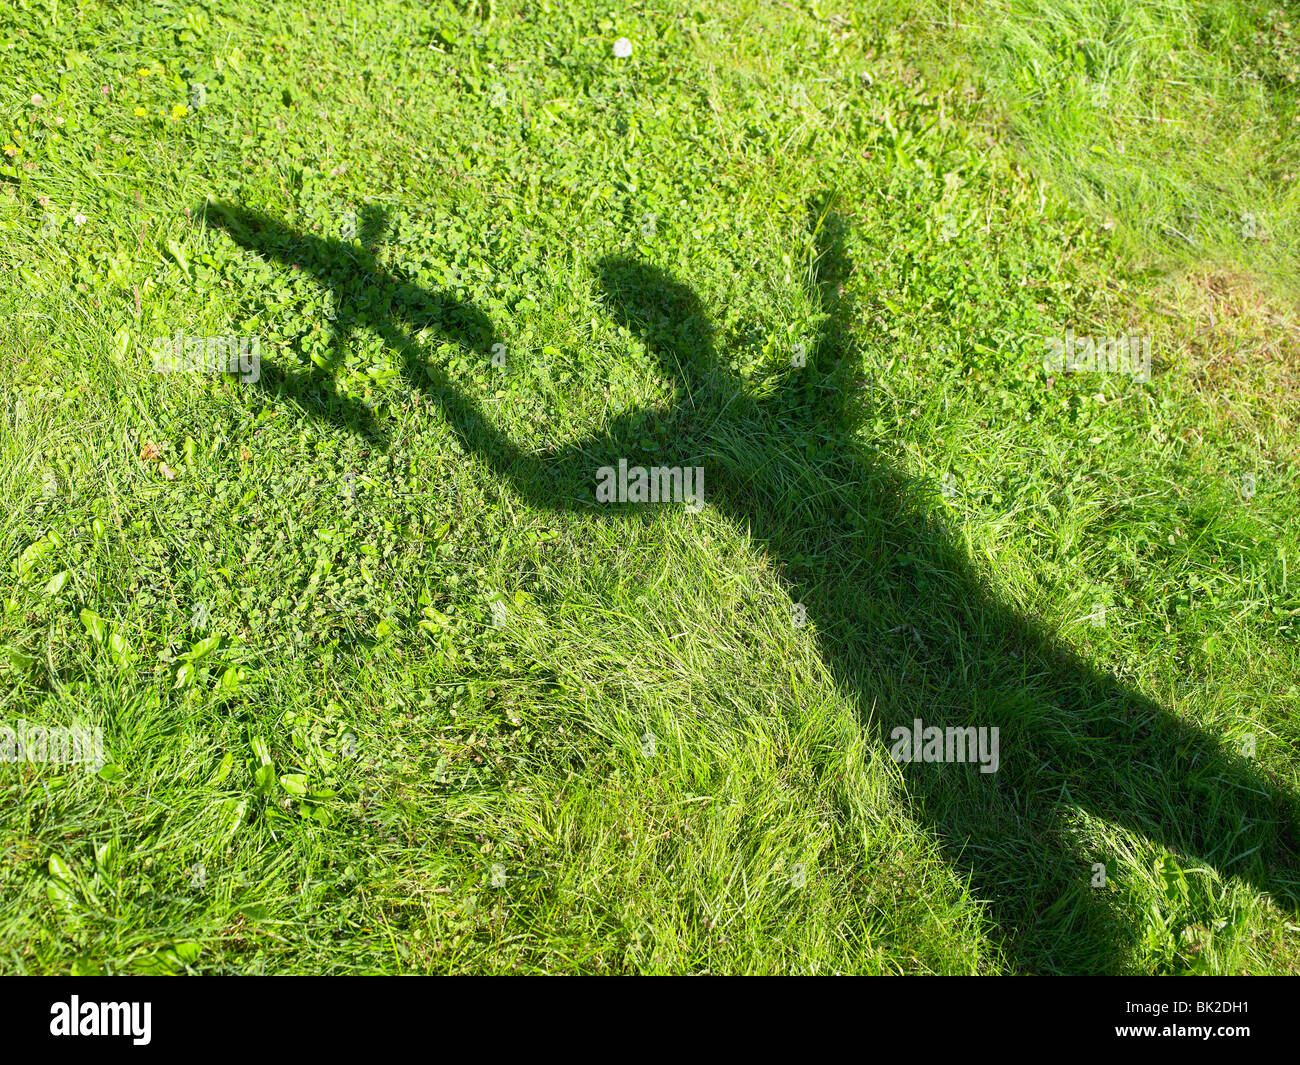 Shadow of a woman holding an rc plane Stock Photo